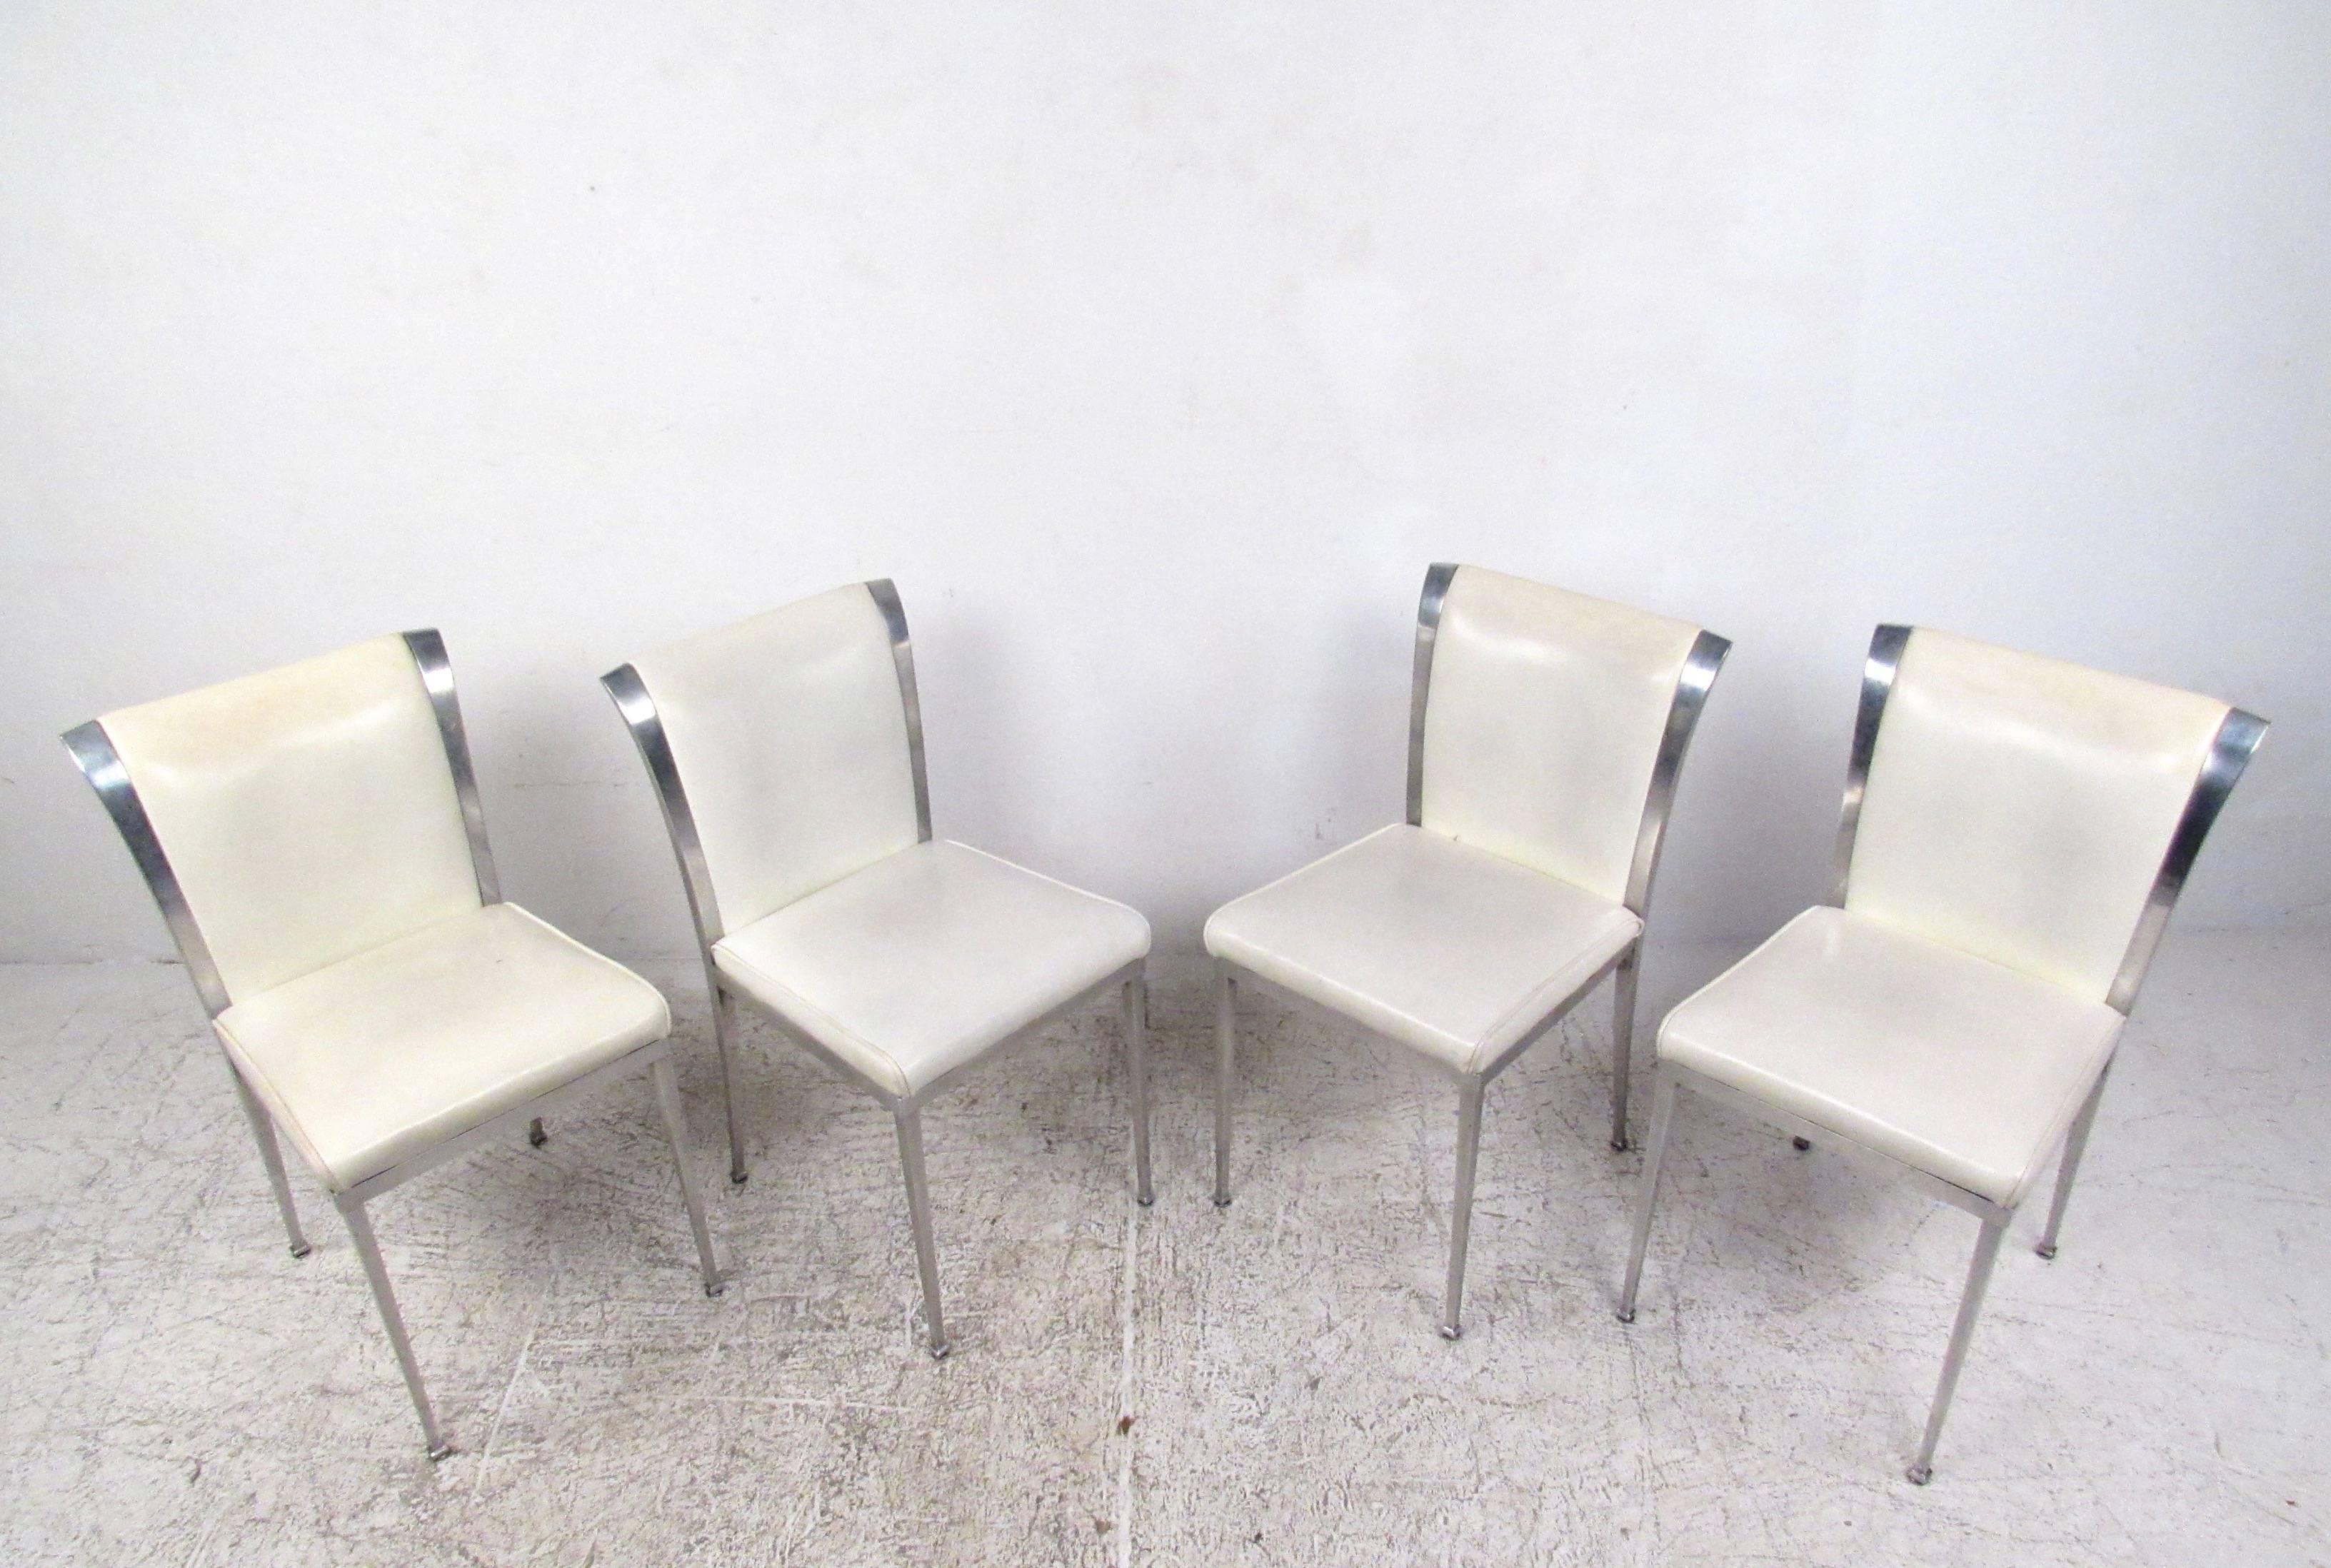 This set of four vintage dining chairs were constructed with sturdy aluminum frames, complete with one piece sculpted feet and tapered back supports. Slightly flared seat backs are upholstered in vintage vinyl, adding to the modern appeal of the